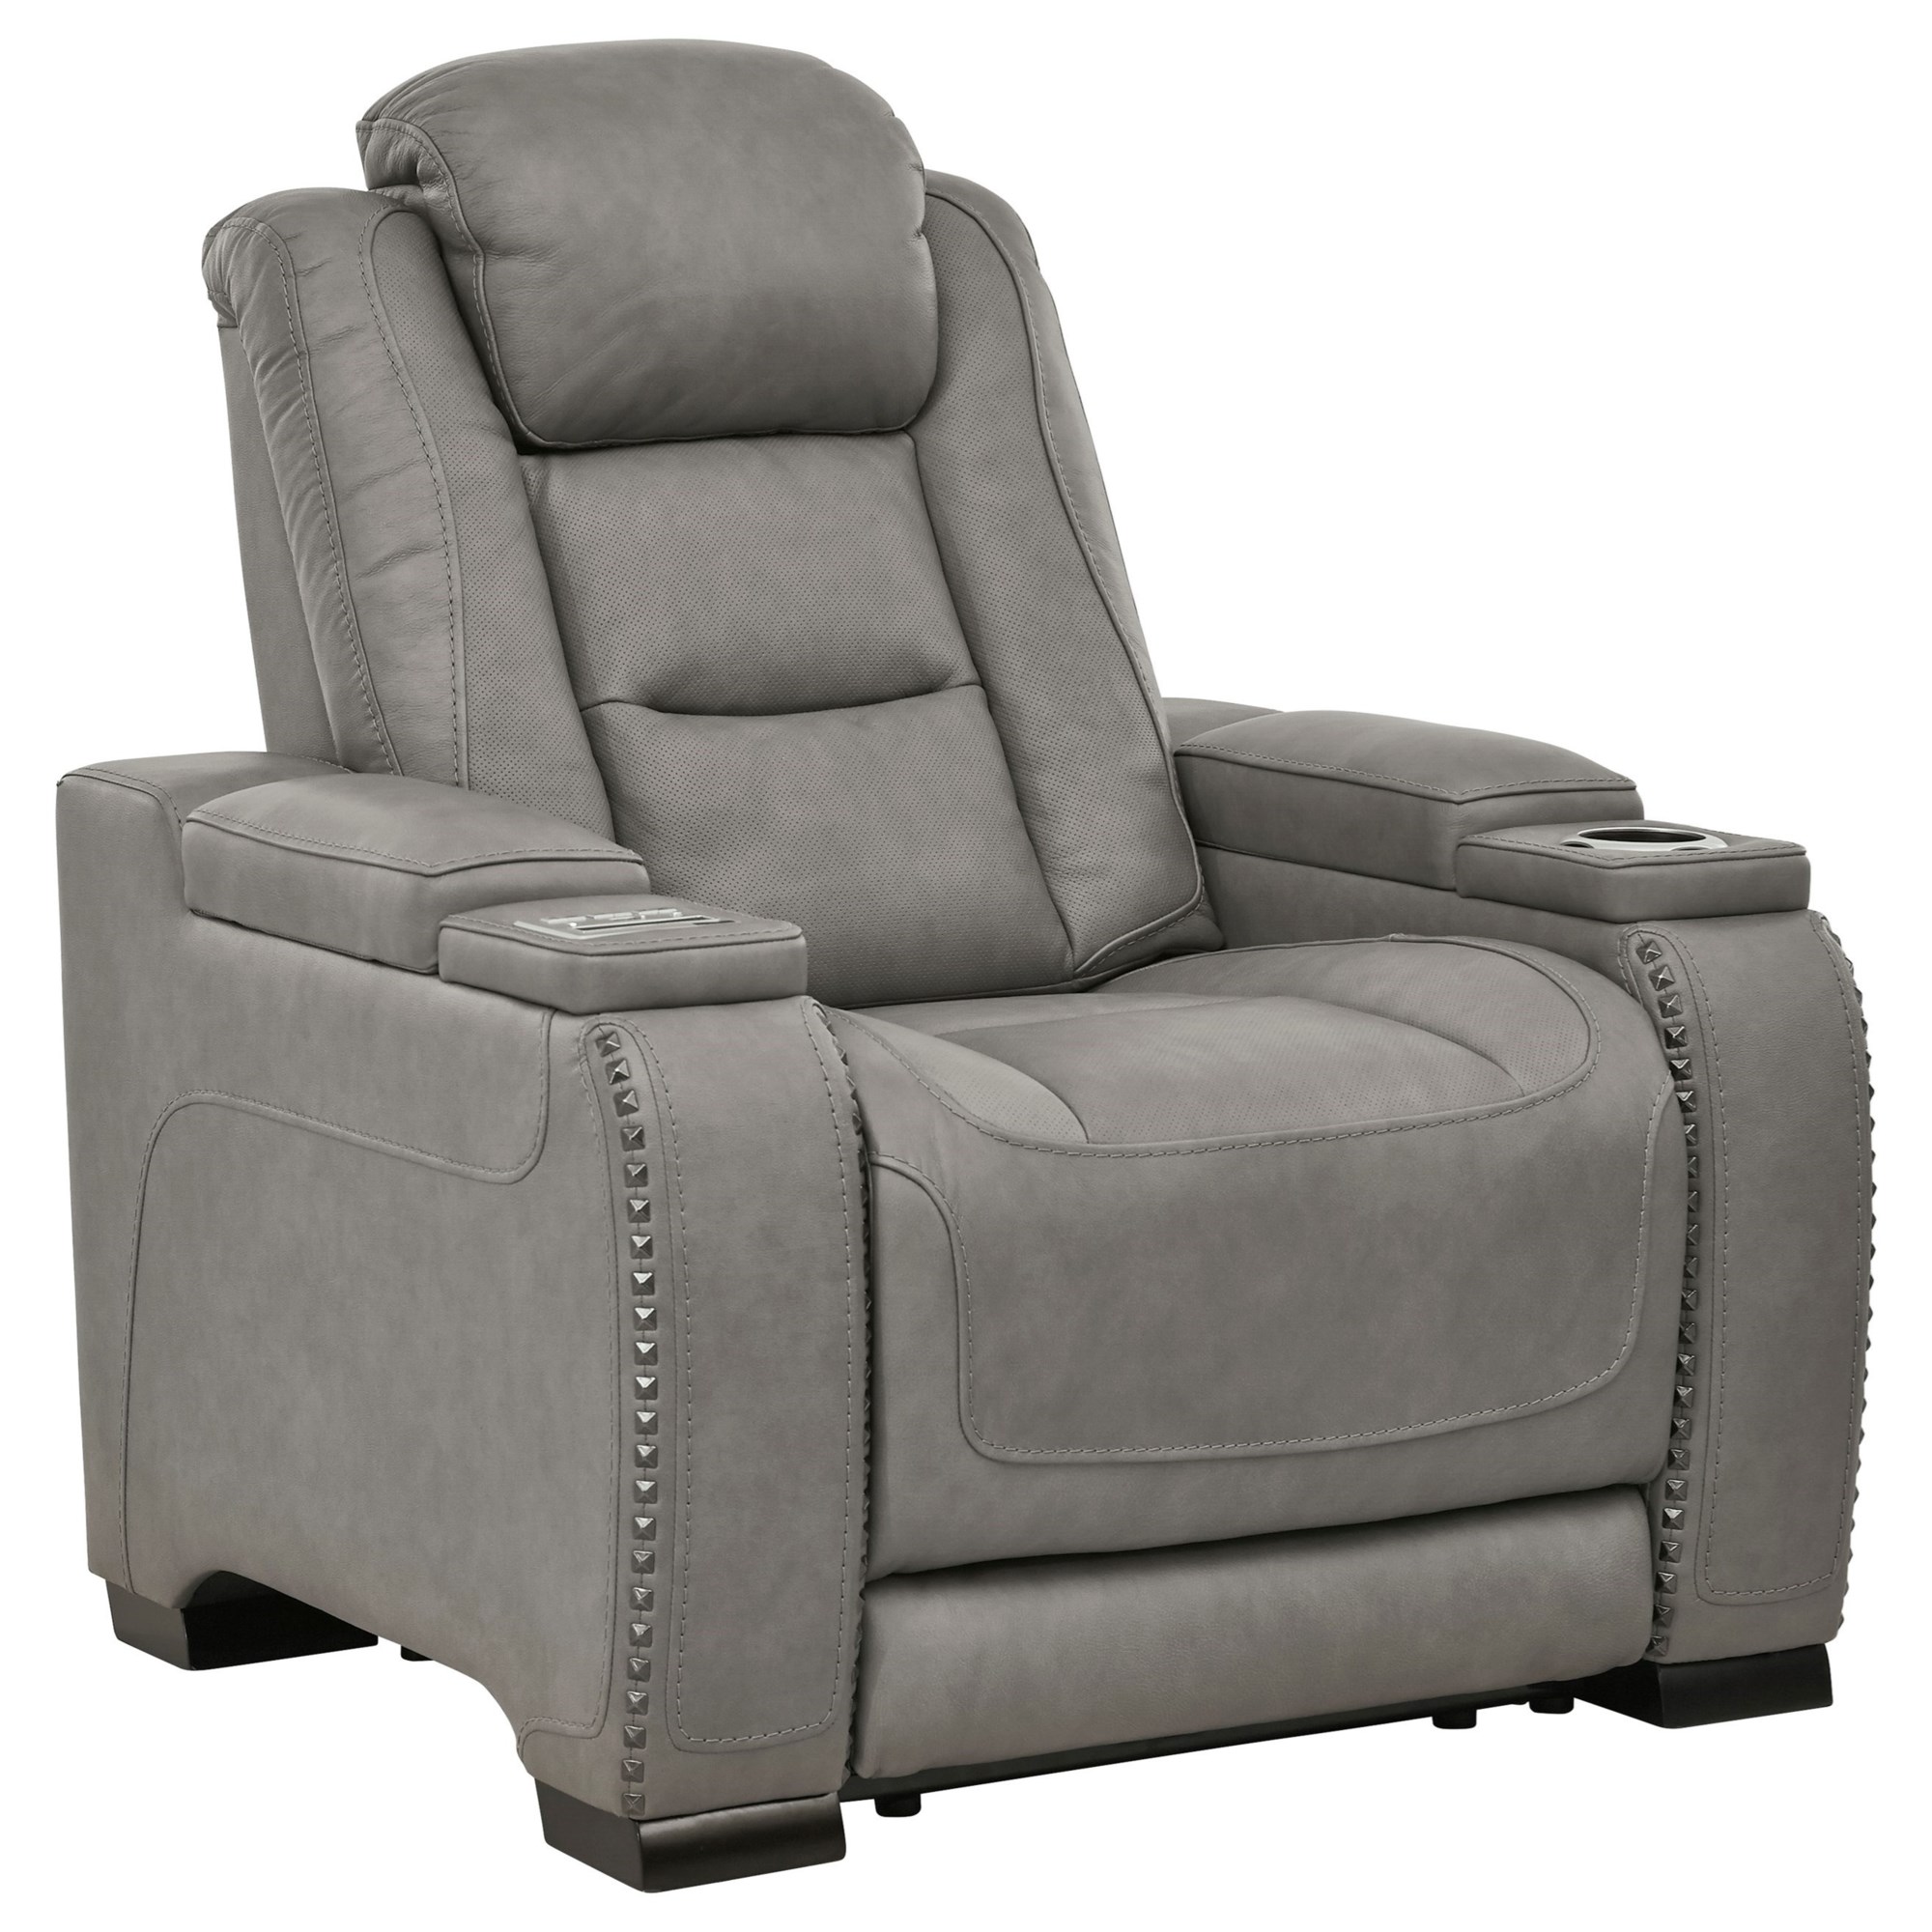 Signature Design by Ashley The Man-Den U8530513 Contemporary Power Recliner  with Adjustable Headrest and Lumbar Support, Furniture and ApplianceMart